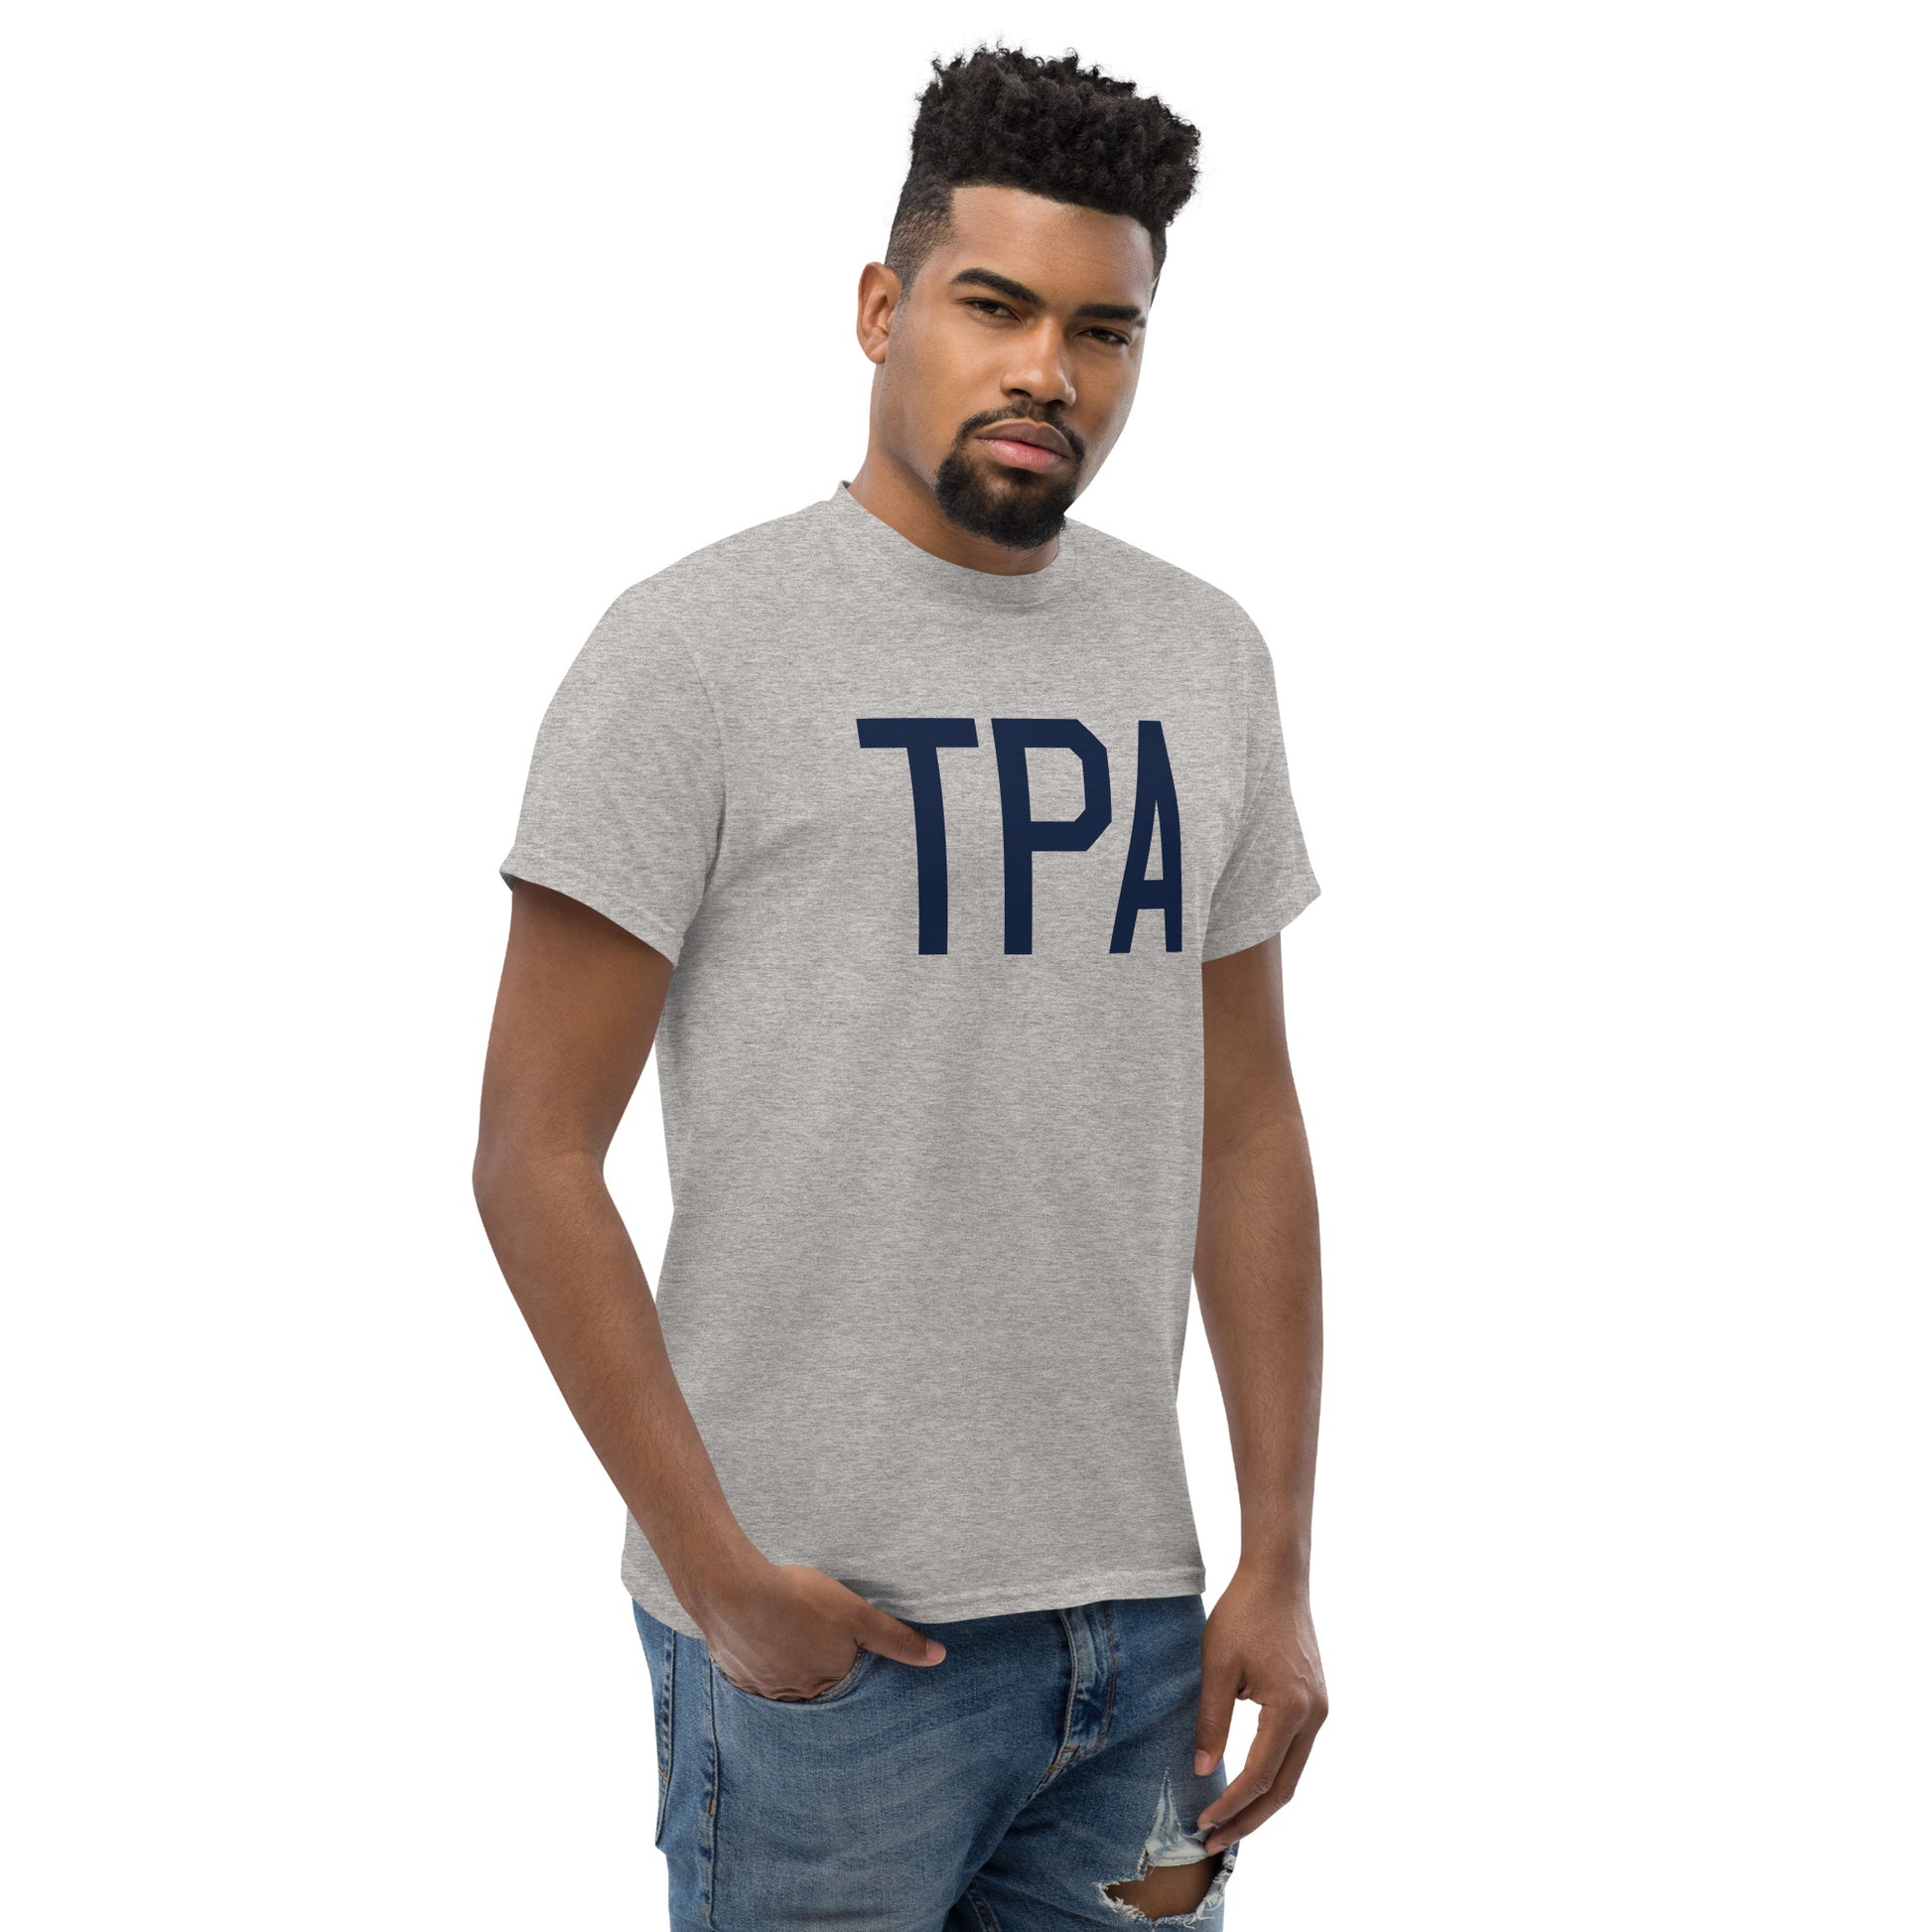 Aviation-Theme Men's T-Shirt - Navy Blue Graphic • TPA Tampa • YHM Designs - Image 08